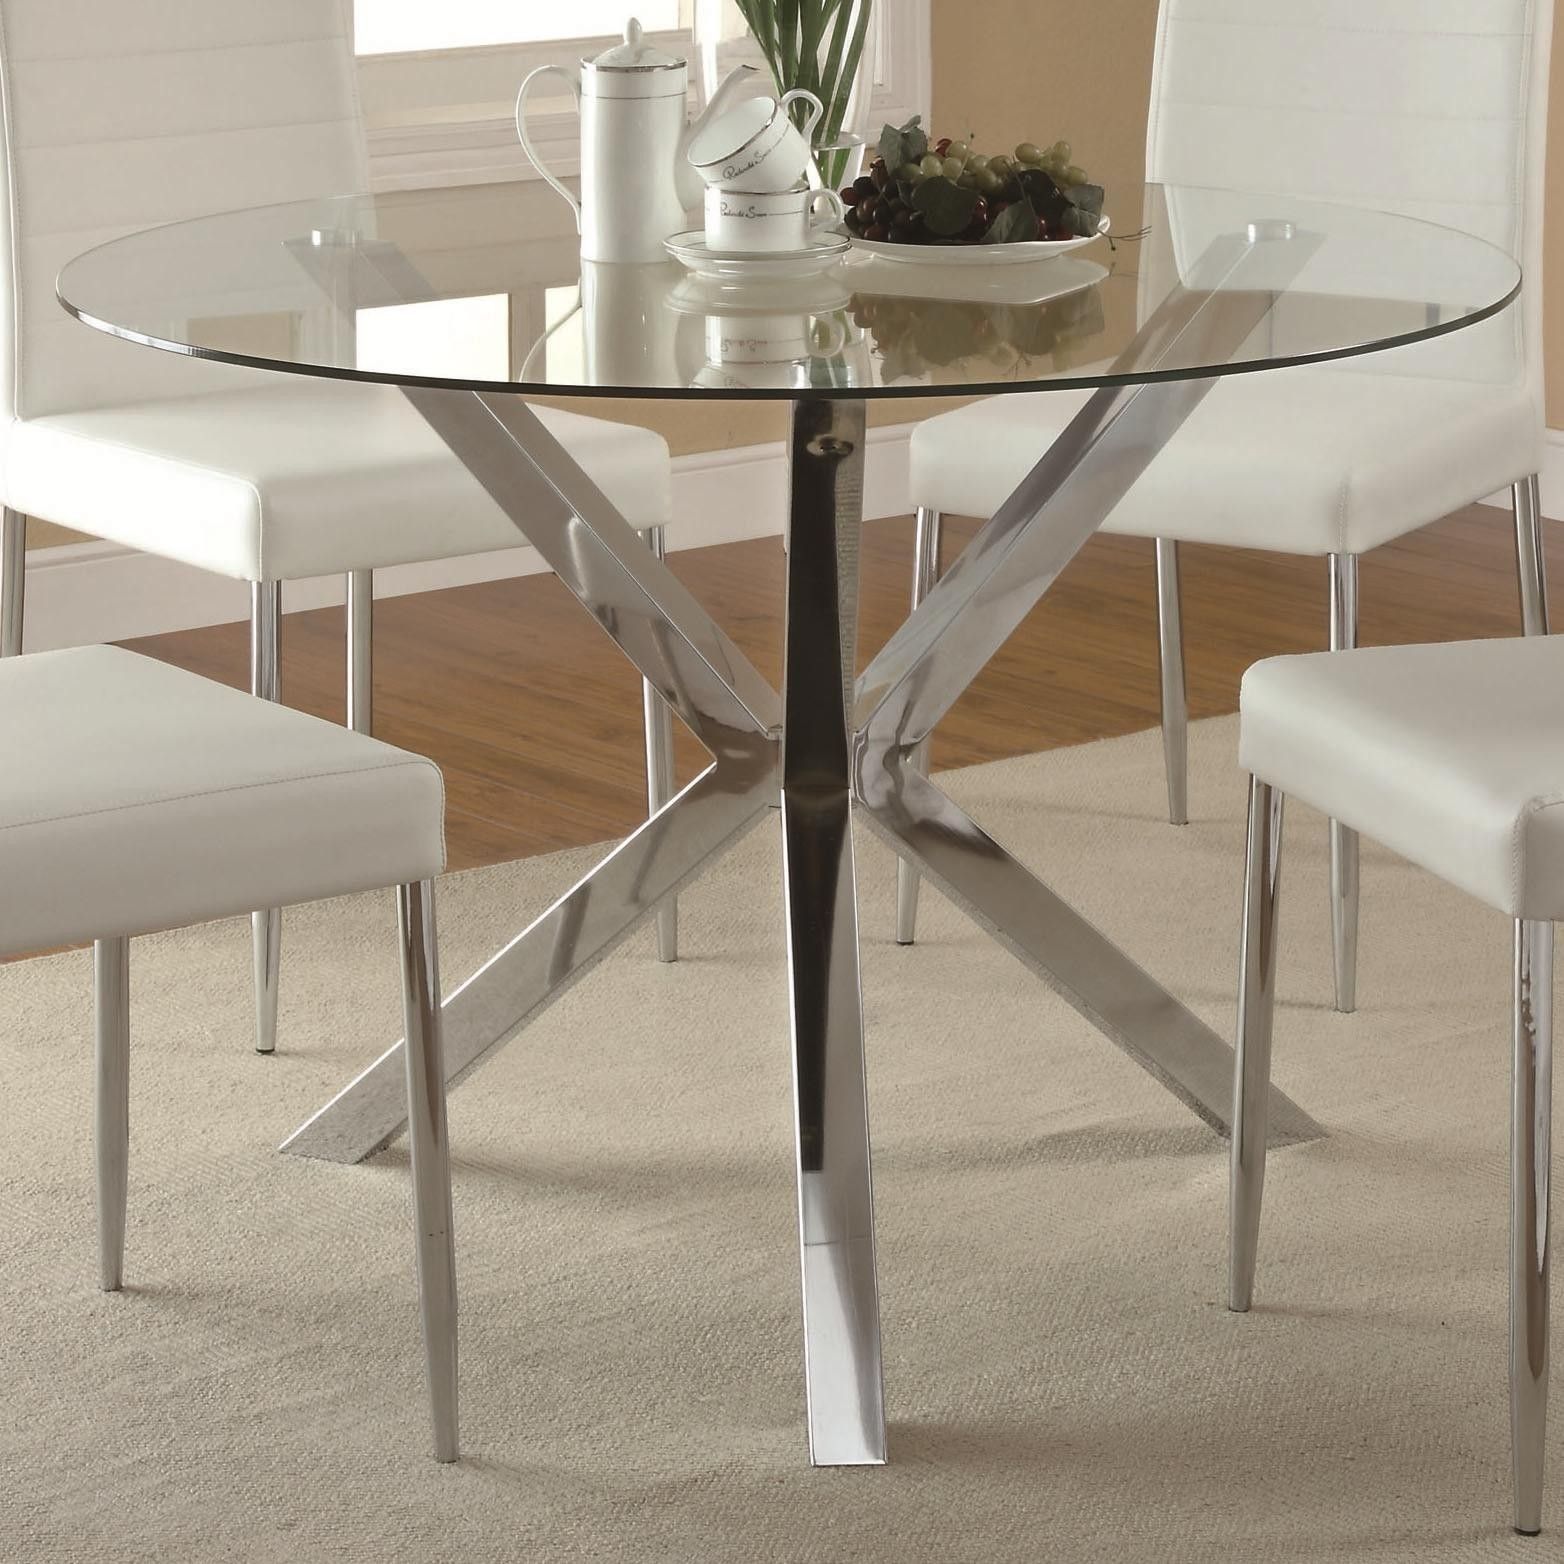 Vance Glass Top Dining Table With Unique Chrome Base 120760 Qlx1 Throughout Most Popular Lassen 5 Piece Round Dining Sets (View 5 of 20)